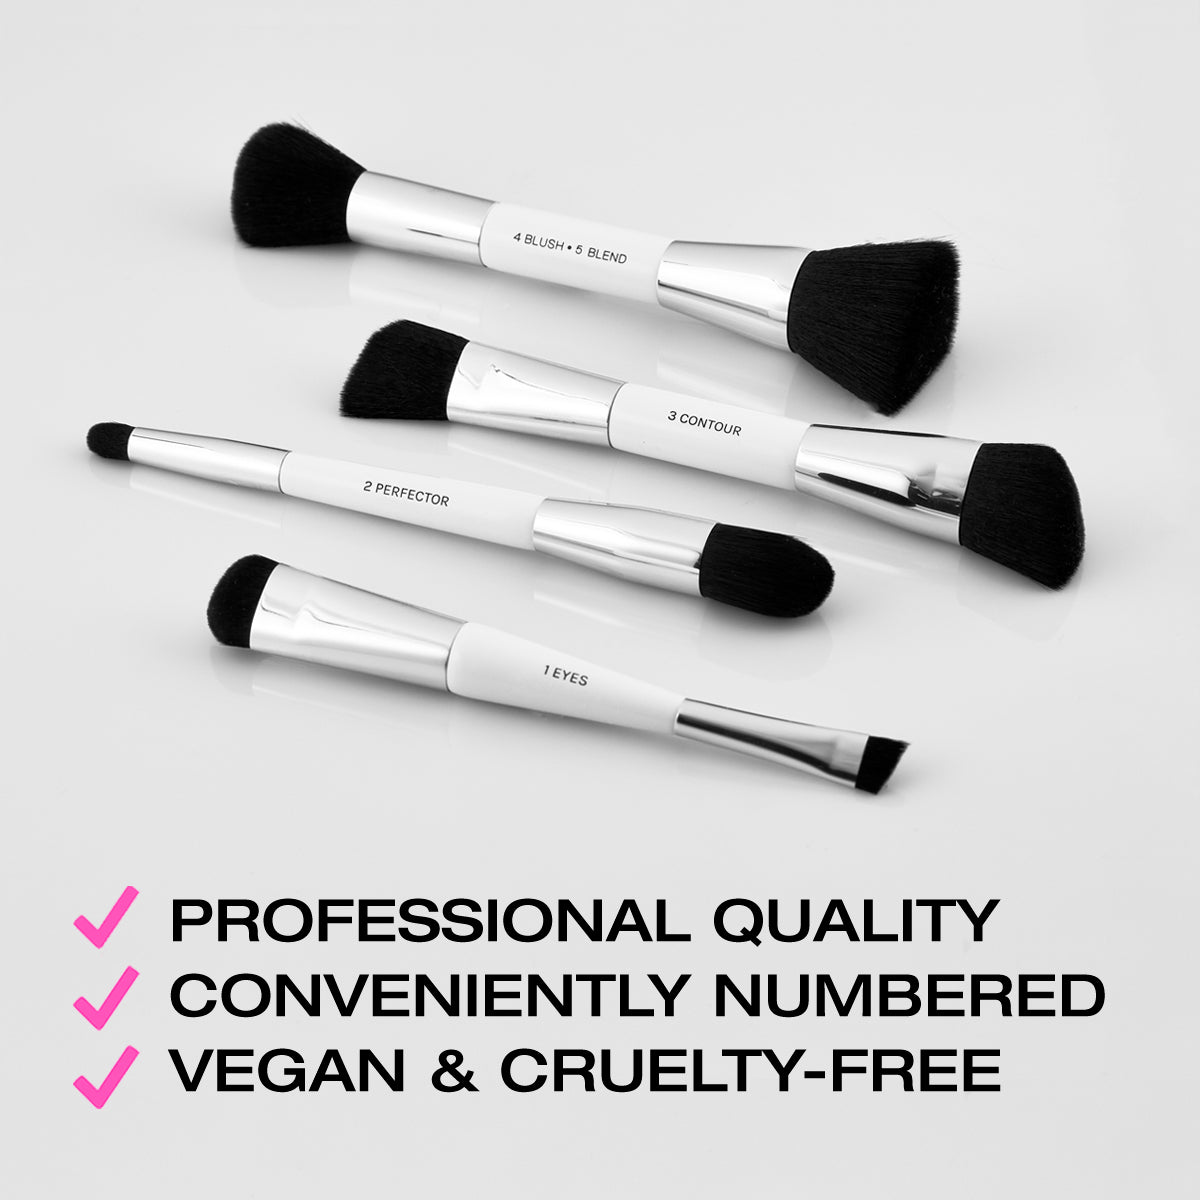 The essential brushes four pack described as professional quality, conveniently numbered, vegan, and cruelty free